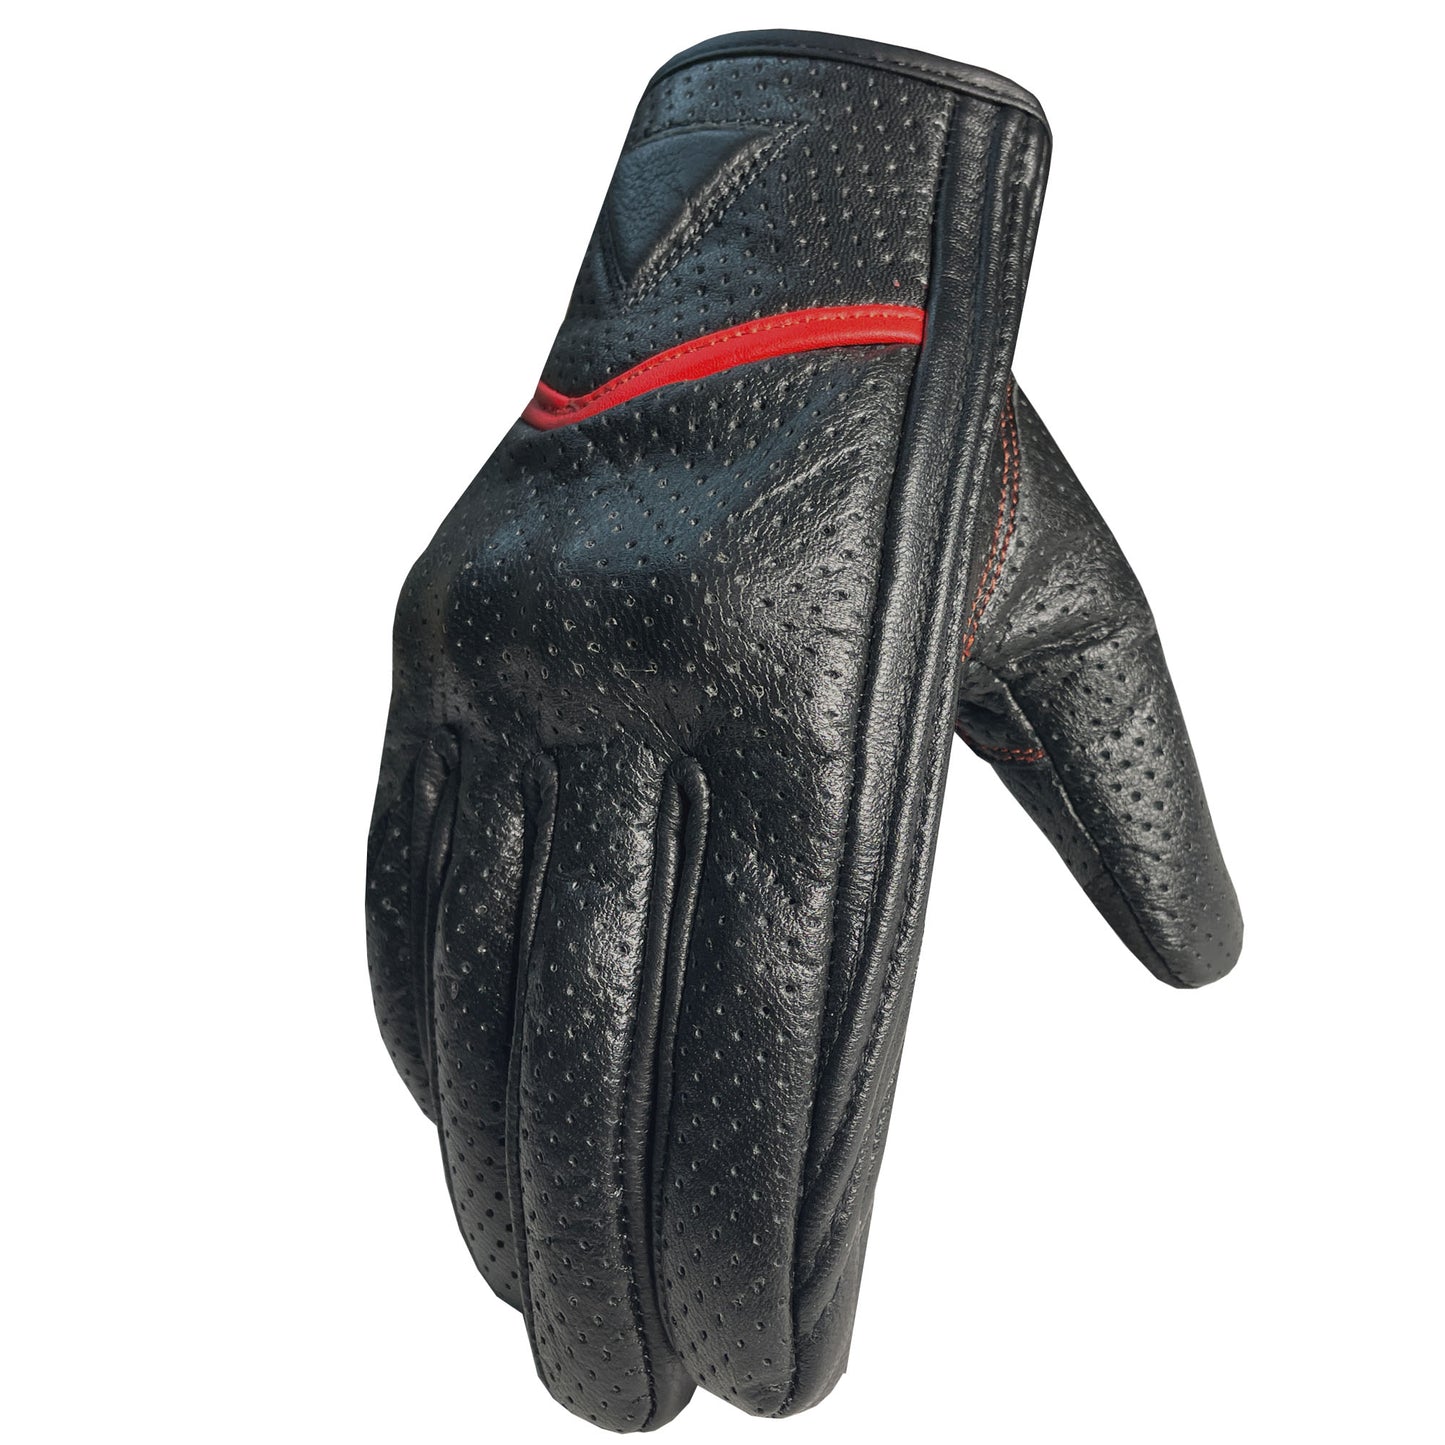 Motorcycle Bicycle Riding Racing Bike Protective Armor Gel Leather Gloves BlackRed